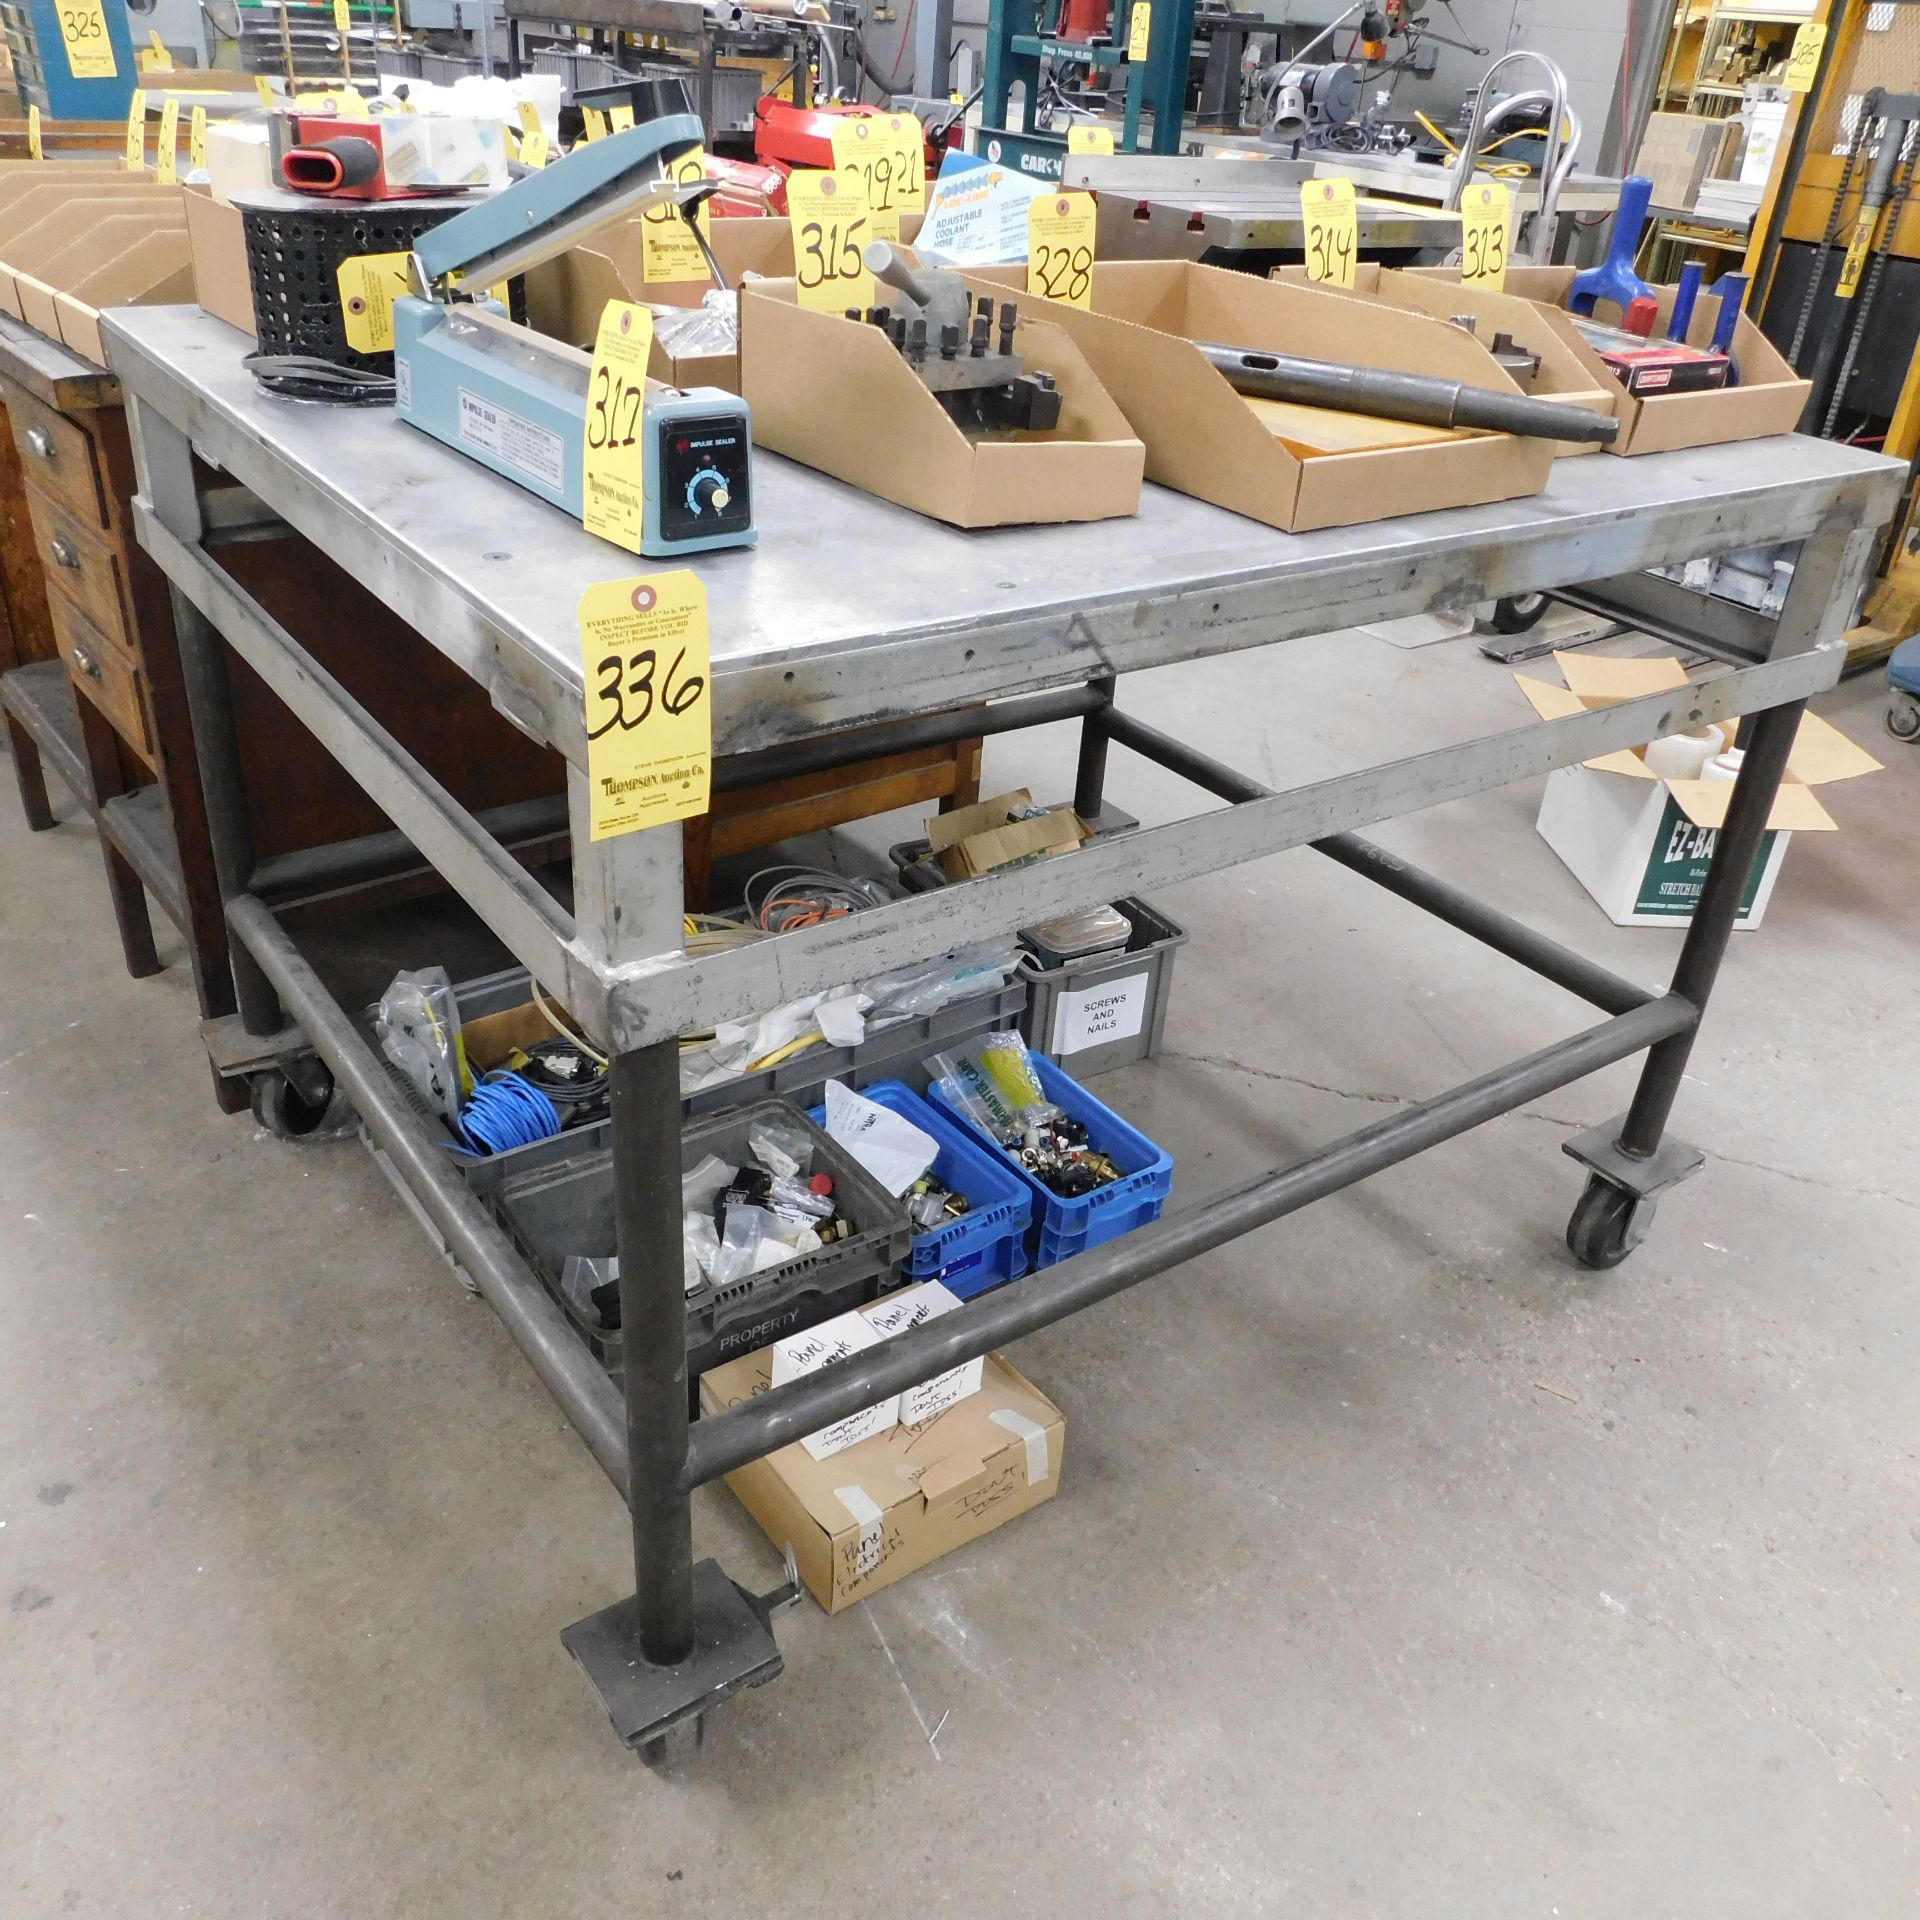 Shop Table on Casters, 45" X 55", No Contents in Photo, Table Only